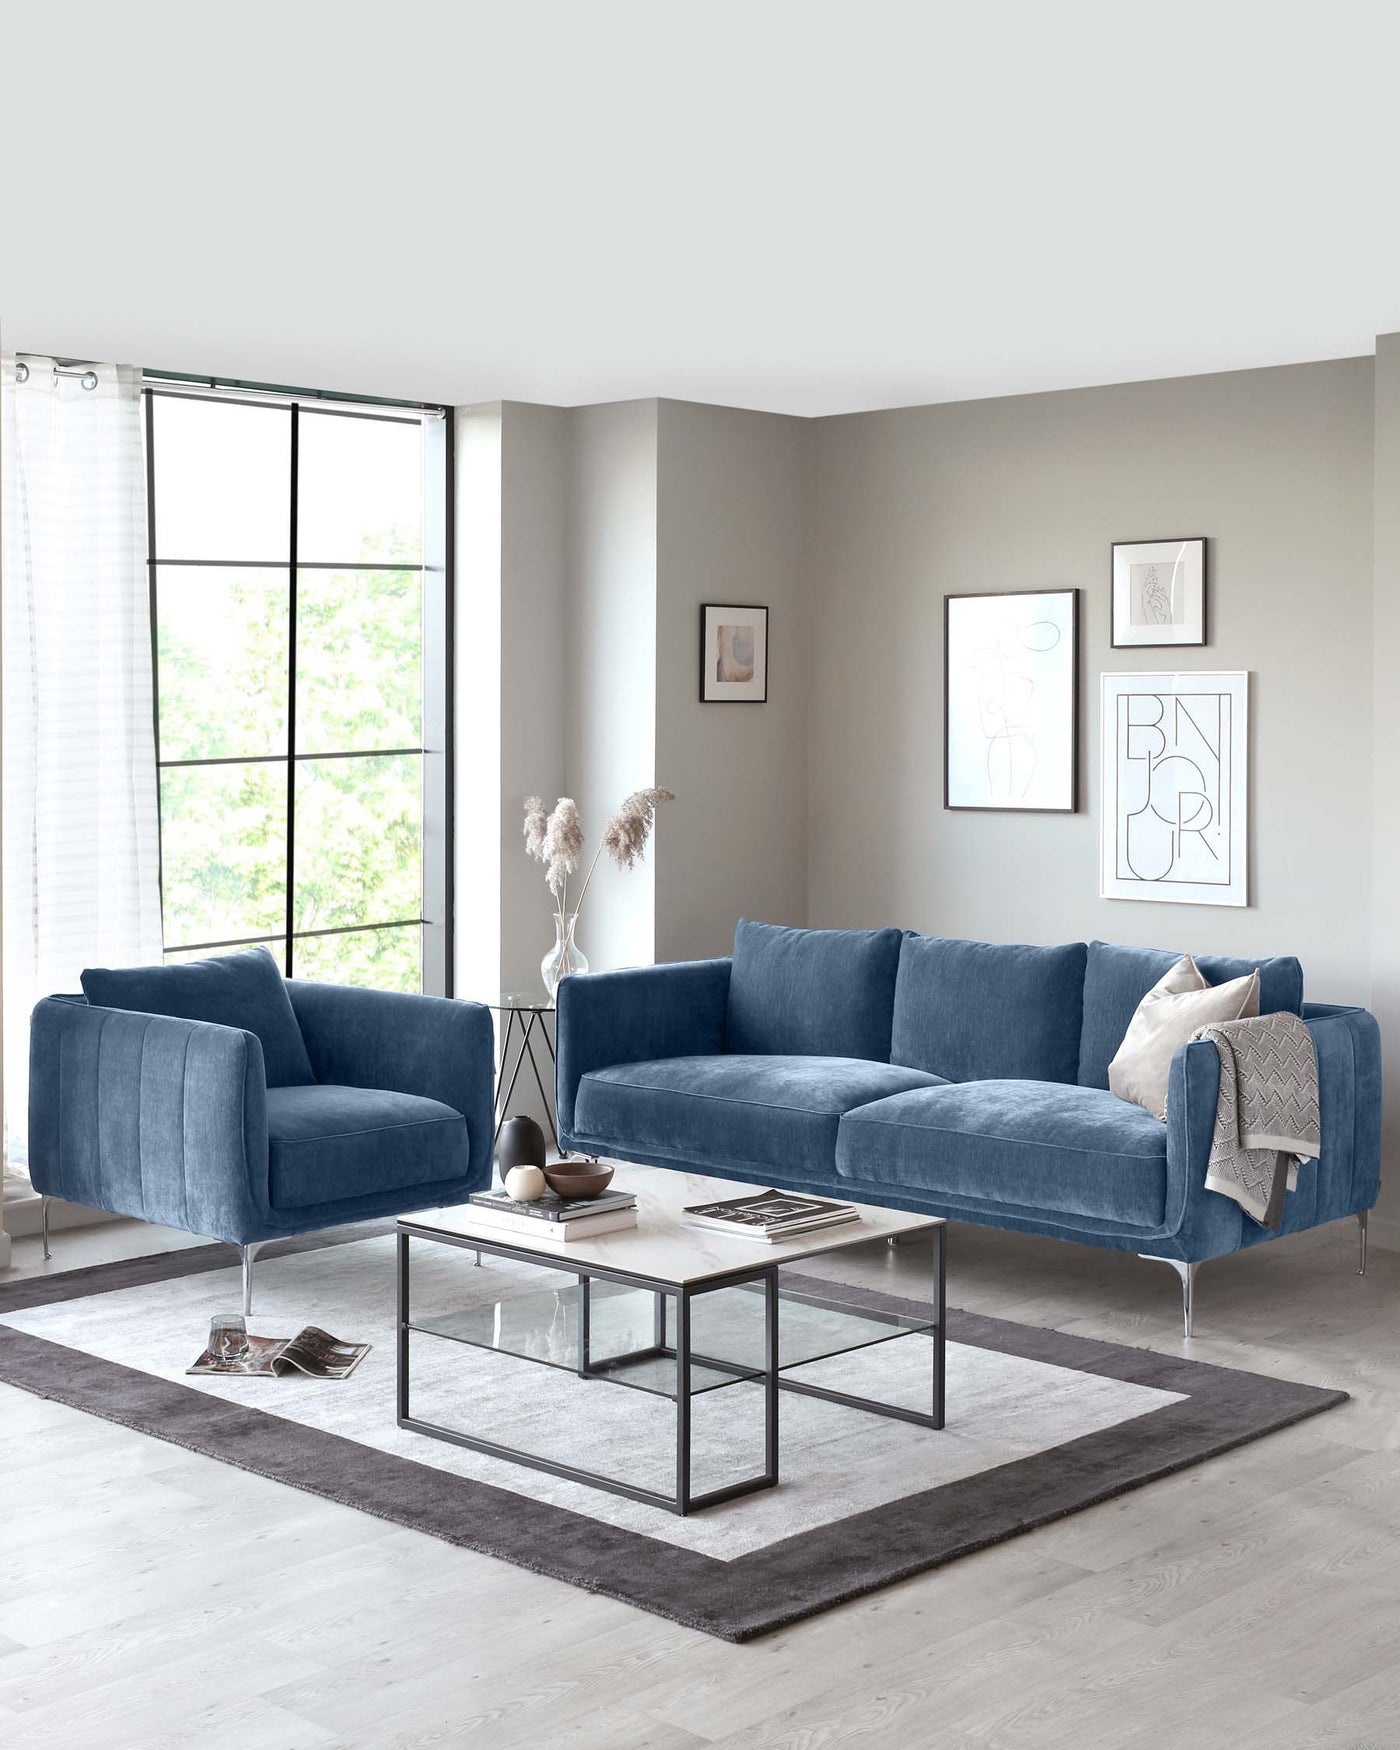 Modern living room setup featuring a plush blue sectional sofa with squared cushions, complemented by a matching blue loveseat. A rectangular glass-top coffee table with a minimalistic metal frame is centred on a grey area rug. The space is accented with decorative throw pillows, a soft blanket, and elegant wall art, creating a cosy and stylish atmosphere.